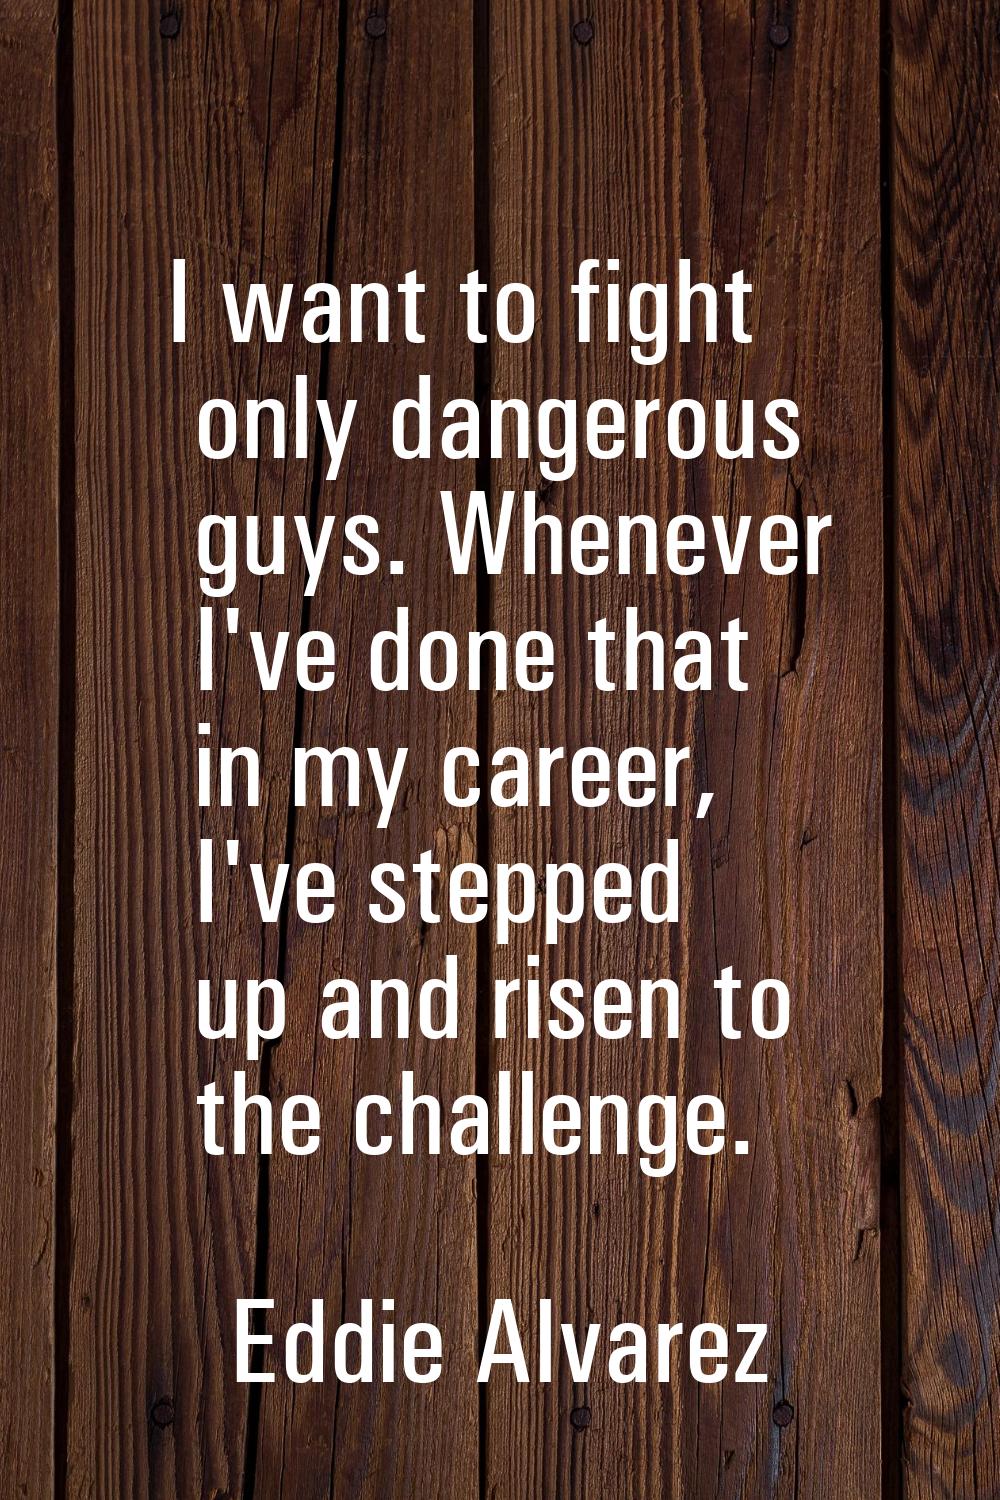 I want to fight only dangerous guys. Whenever I've done that in my career, I've stepped up and rise